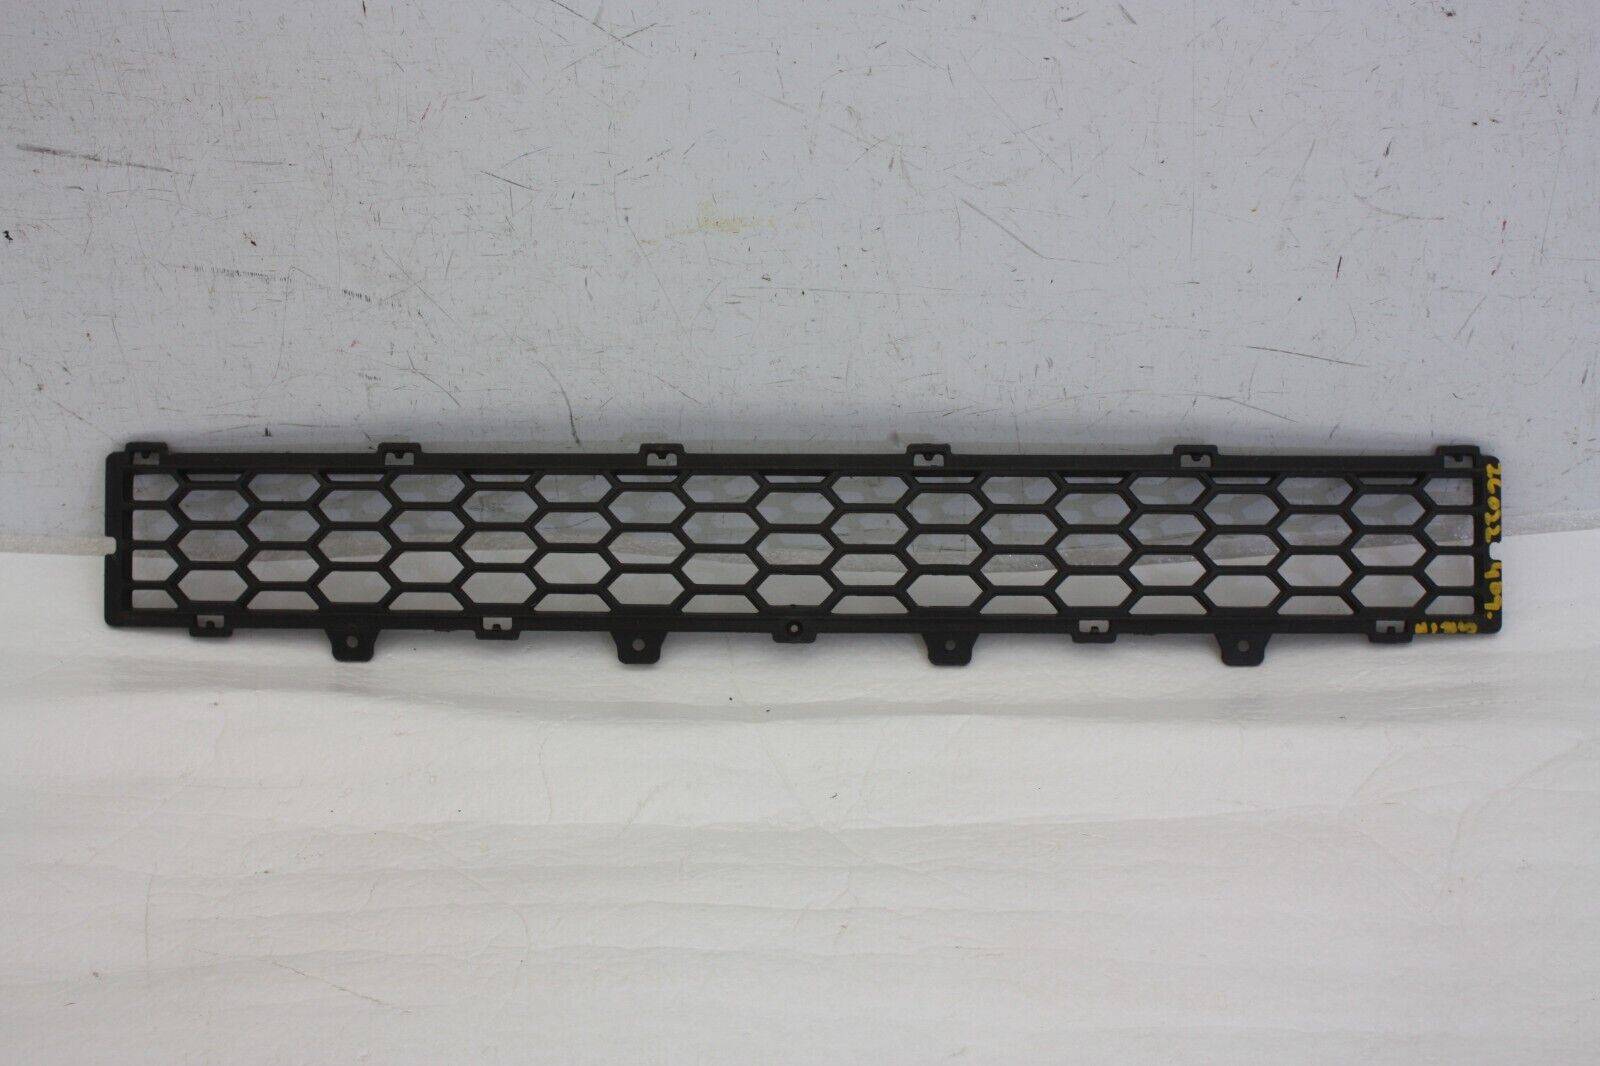 Chevrolet-Captiva-Front-Bumper-Lower-Grill-2006-to-2011-96623441-Genuine-176268252421